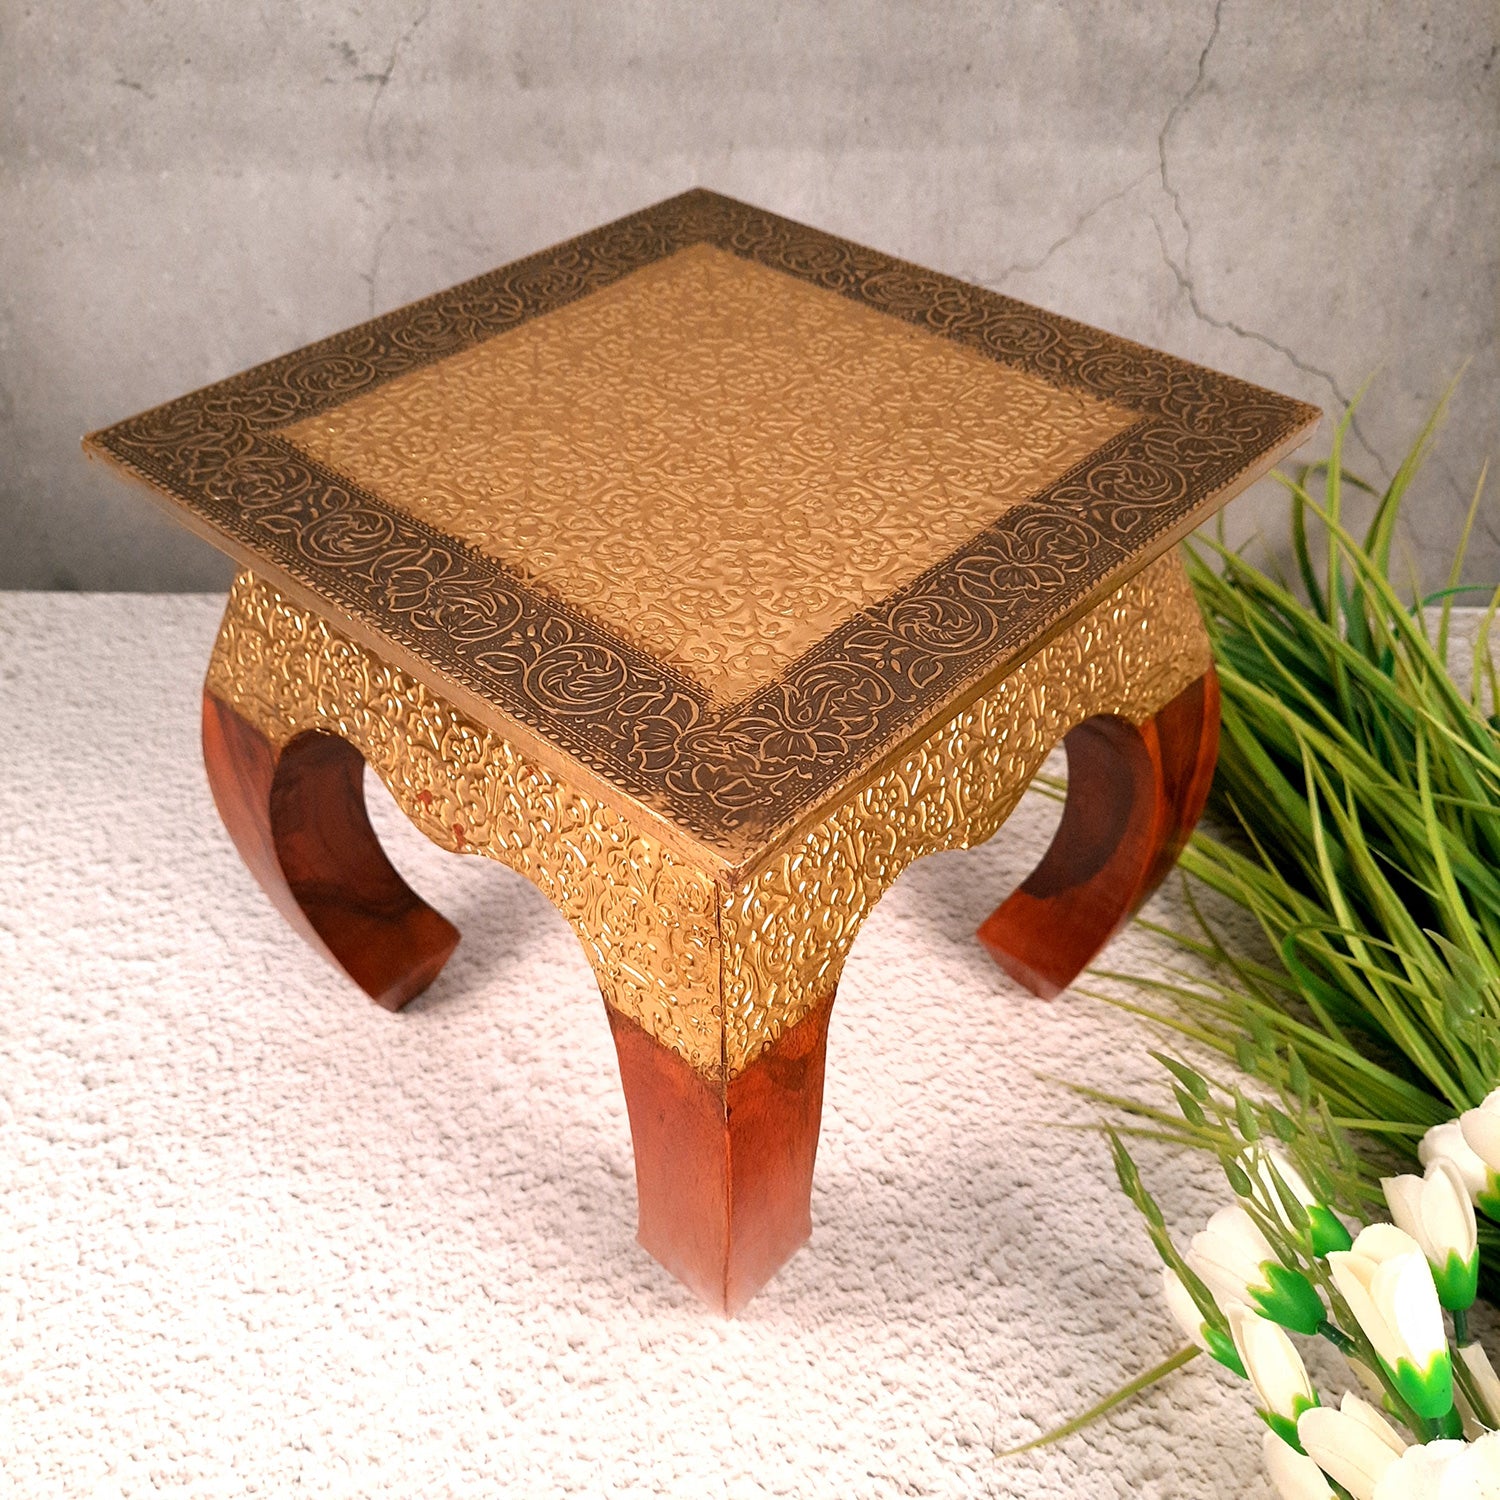 Side Table | Wood & Brass End Tables Cum Stool - for Keeping Lamp, Vases & Plants | Small Stools - for Sitting, Bedside, Home Decor, Corners, Sofa Side Stool, Office & Gifts - 10 Inch - apkamart